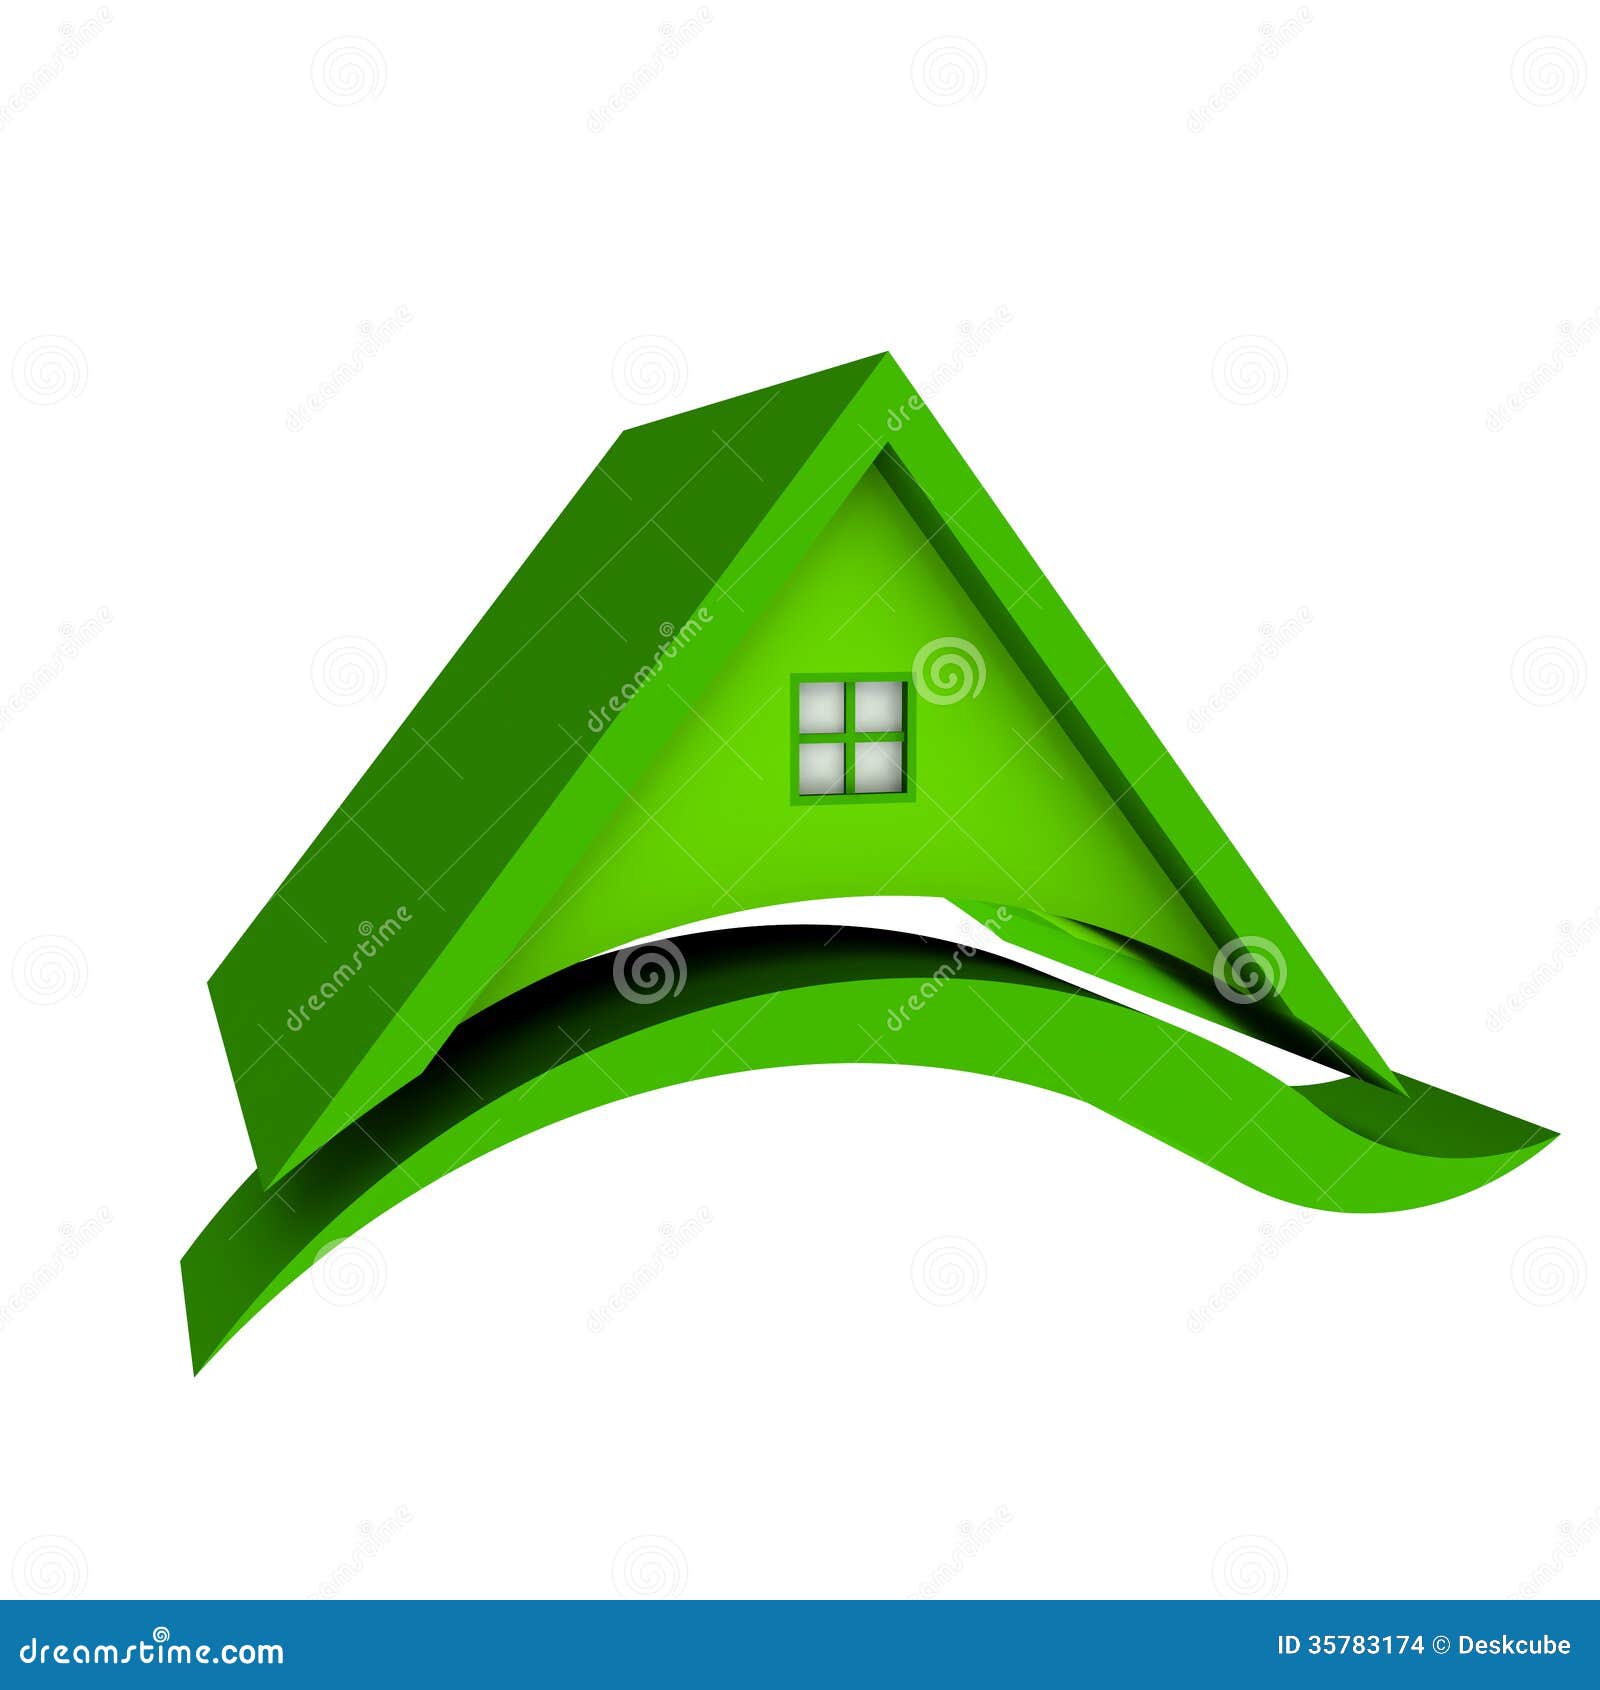 green roof clipart - photo #5